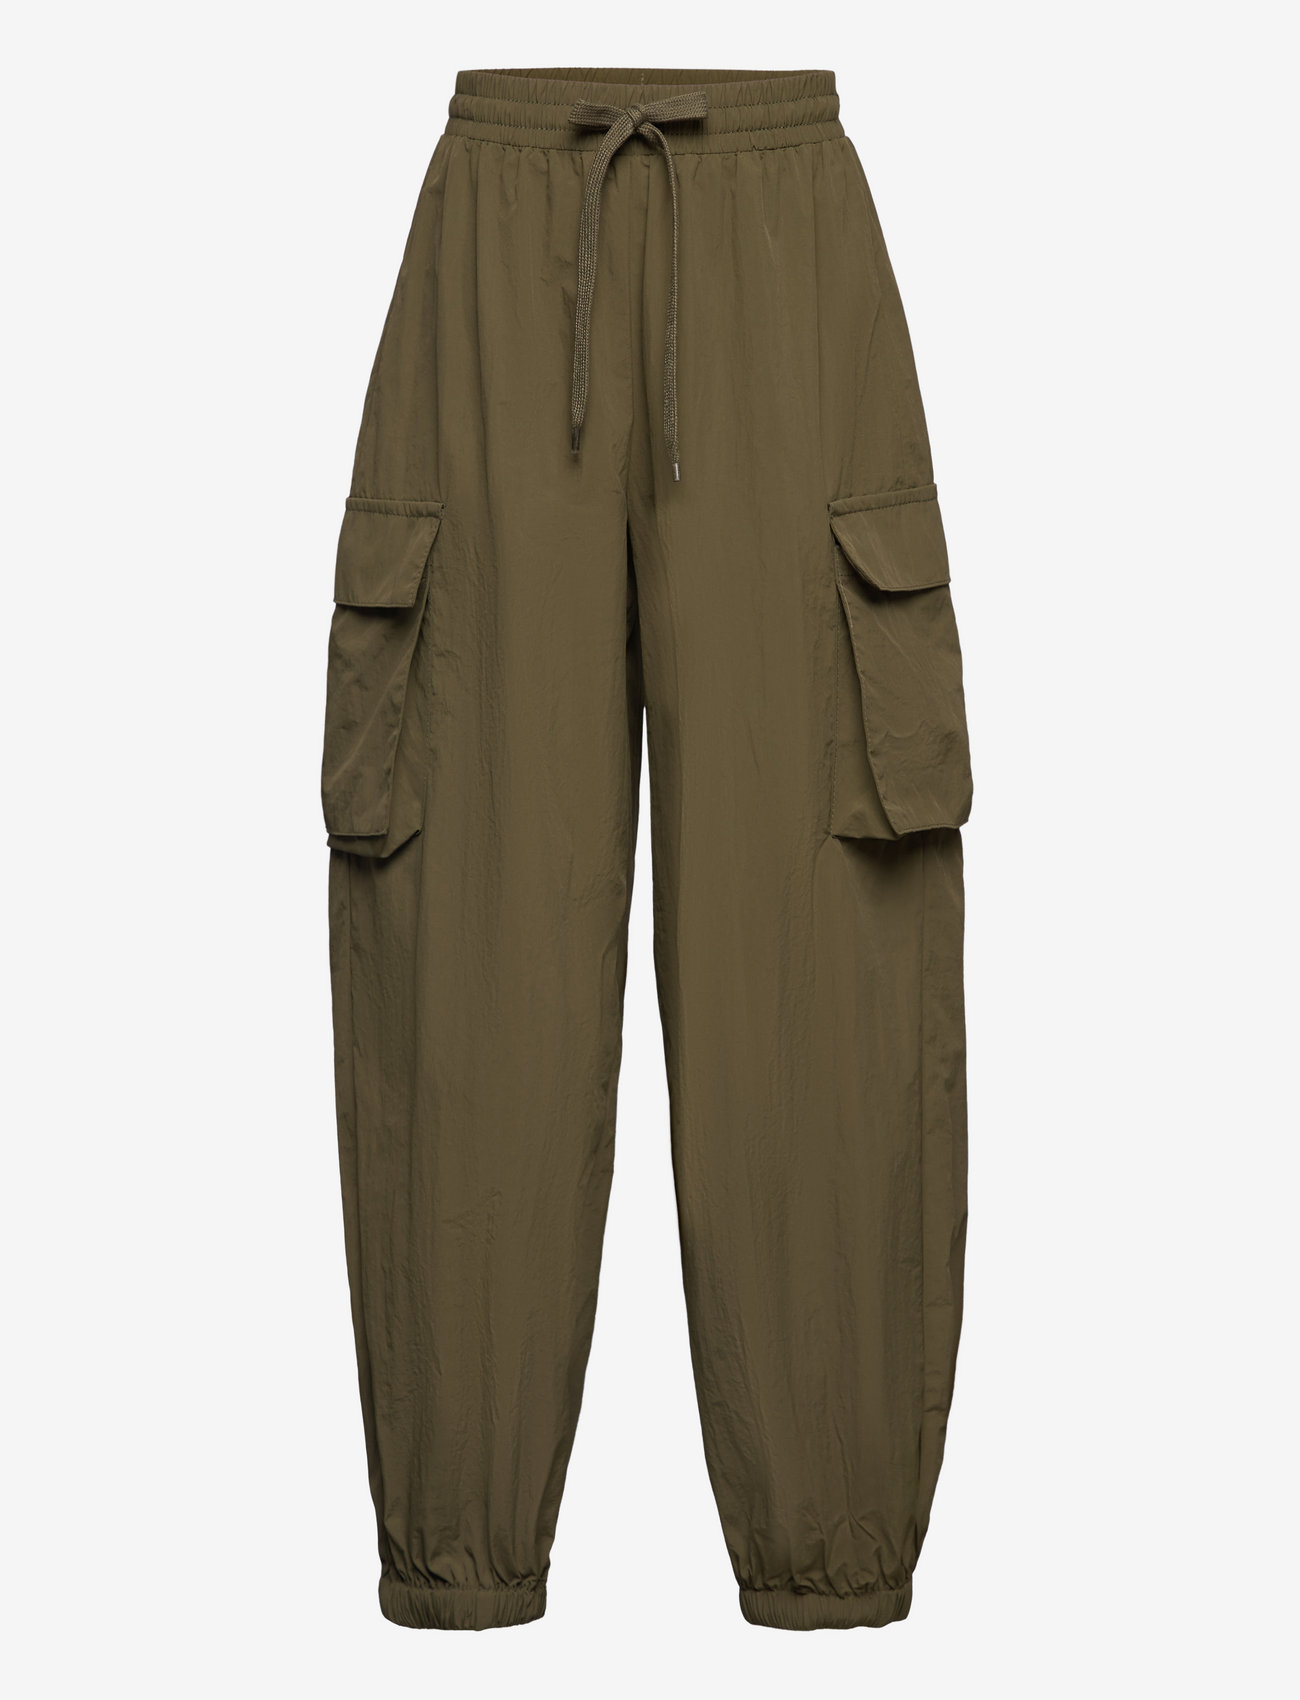 Sofie Schnoor Young - Trousers - kelnės - army green - 0